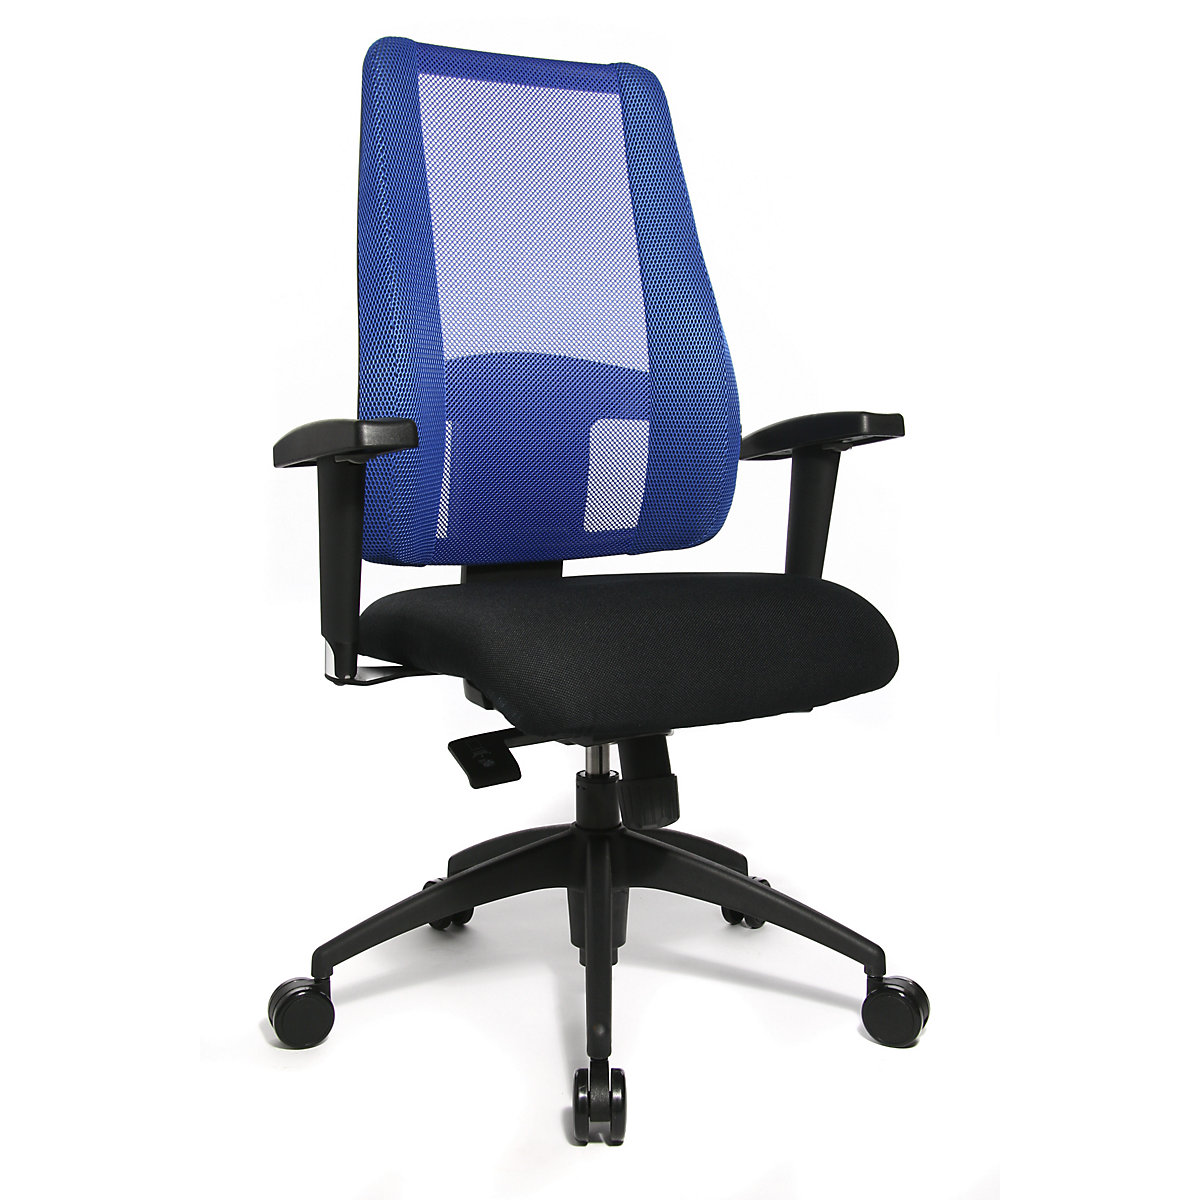 LADY SITNESS DELUXE office swivel chair – Topstar, flexible with 7 zones, black / blue-4